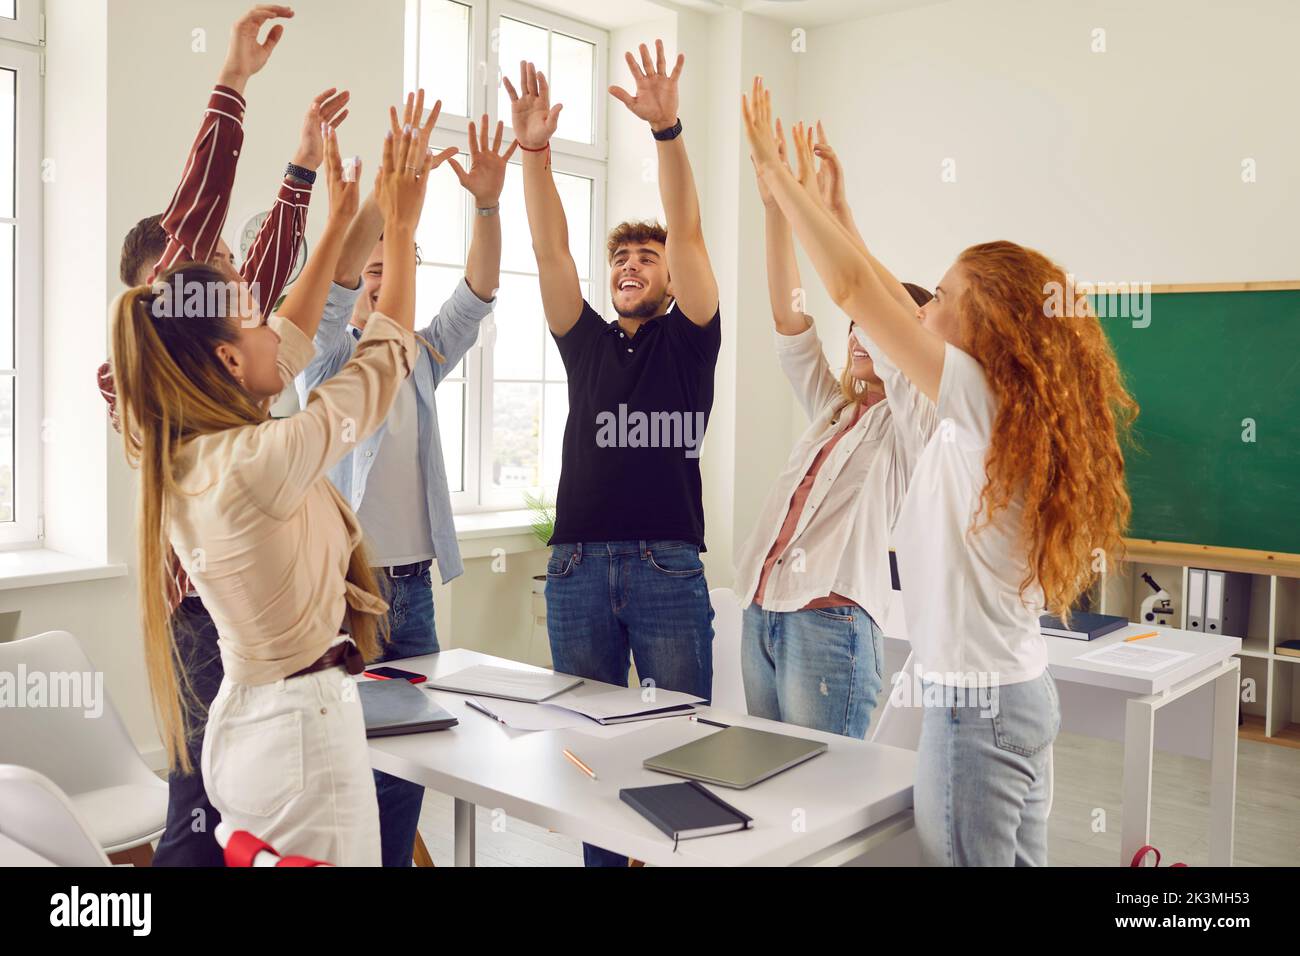 Group of happy school students enjoying teamwork and having fun in the classroom Stock Photo